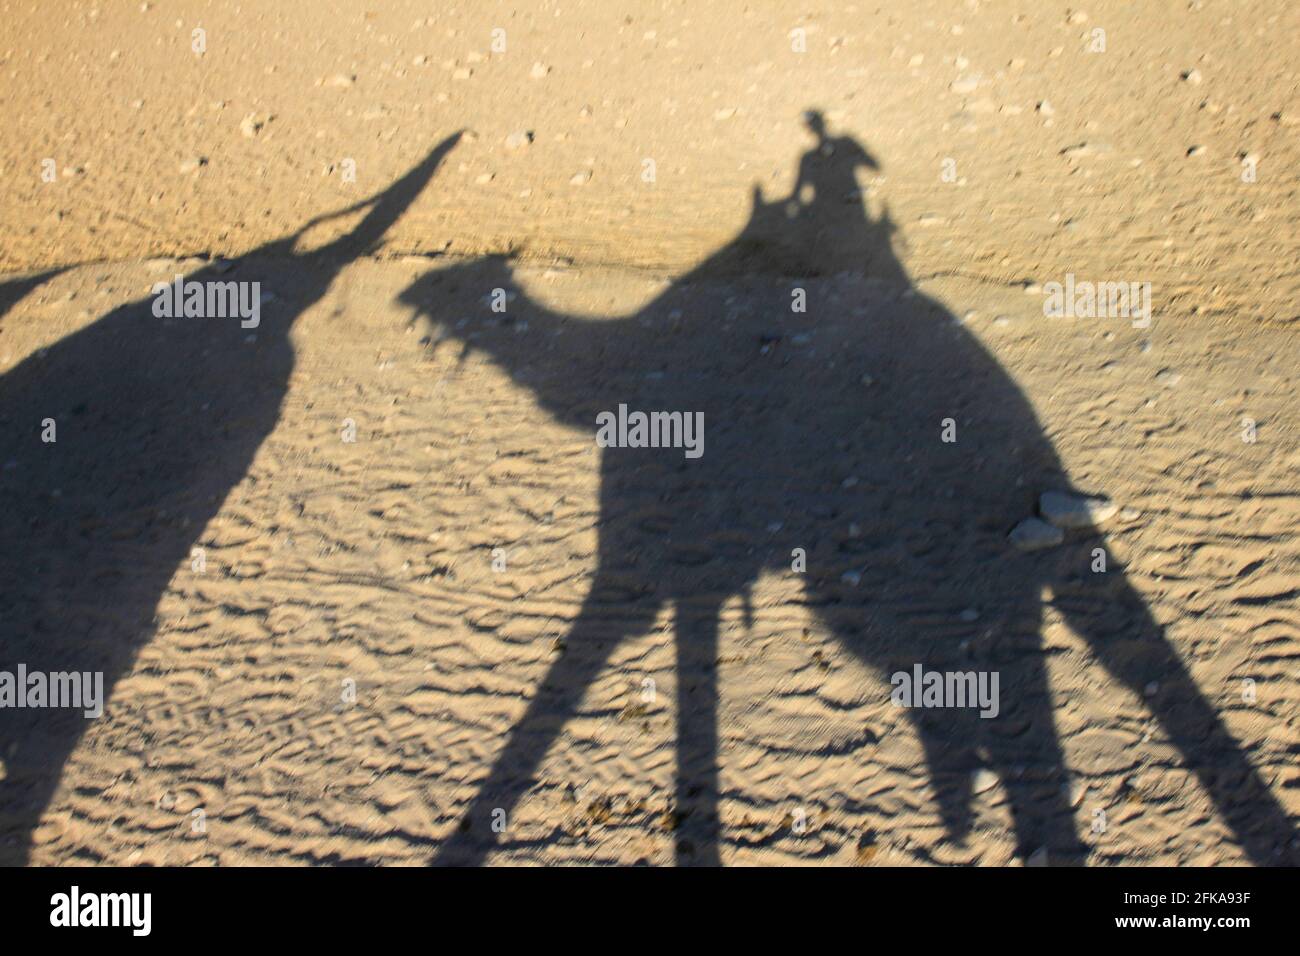 Silhouette of people riding camels on sand in the desert, Giza, Egypt Stock Photo